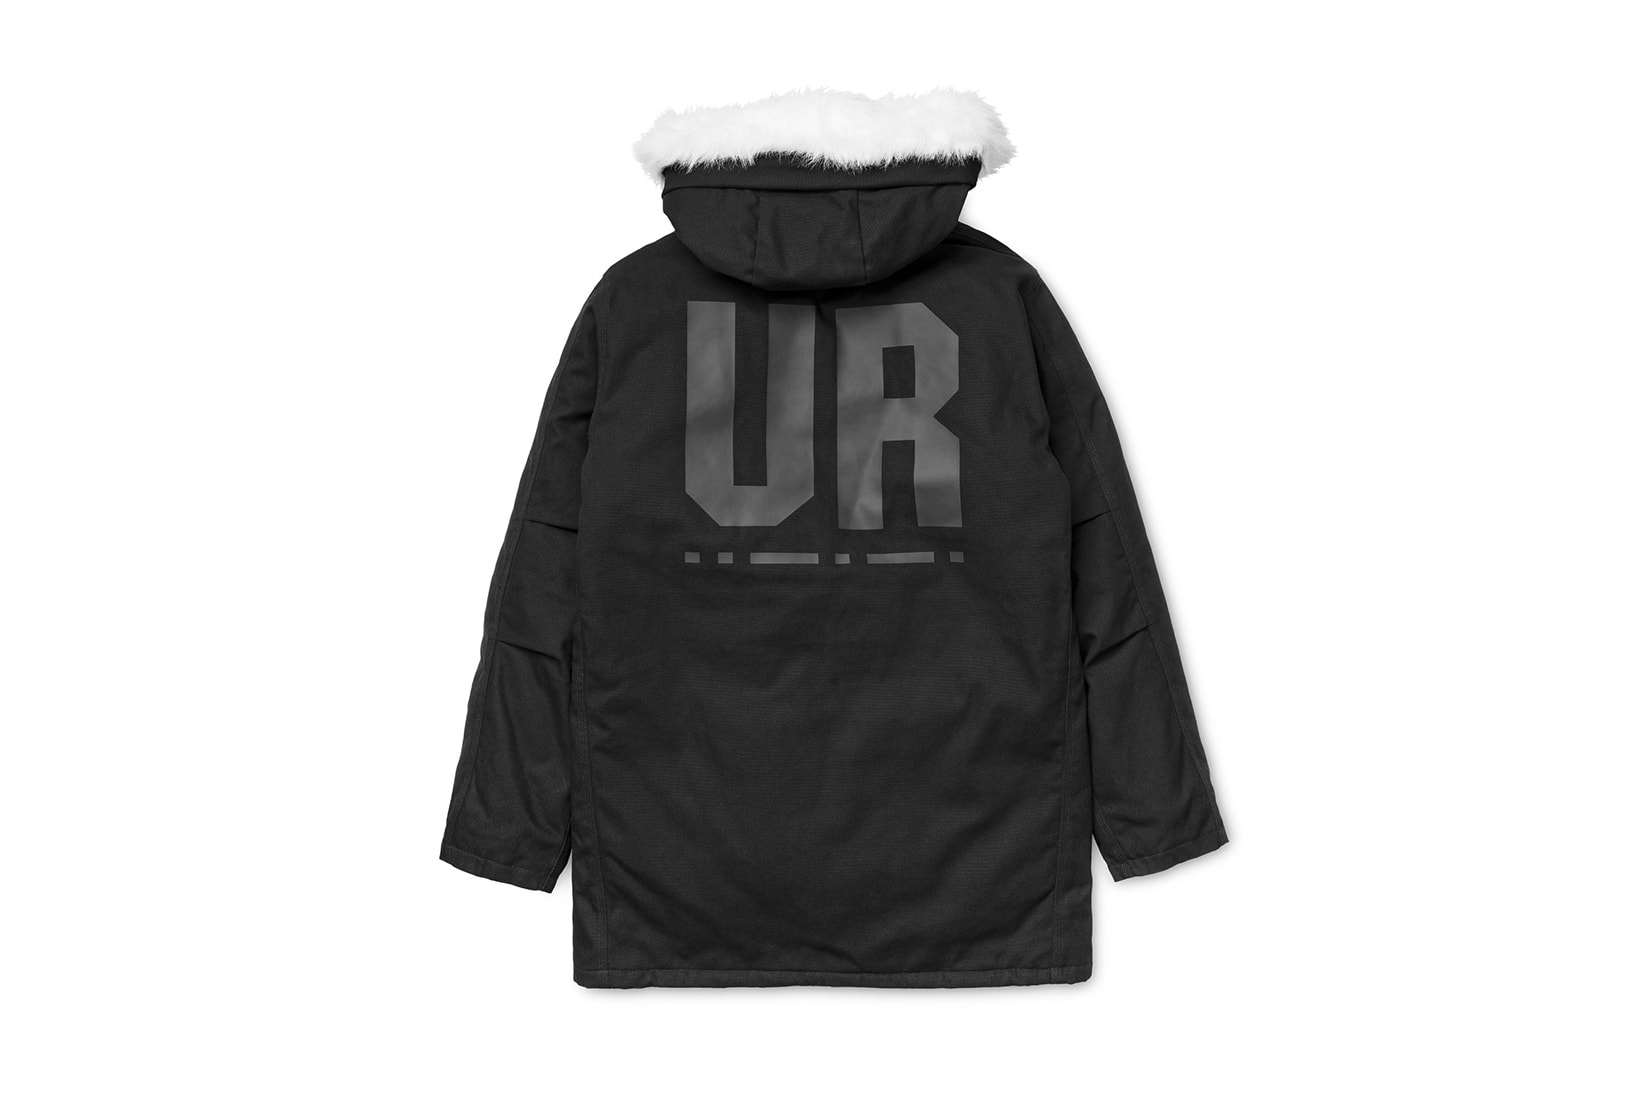 Underground Resistance Carhartt WIP Capsule Collection Collaboration Black White Detroit 2017 November 17 Release Date Info